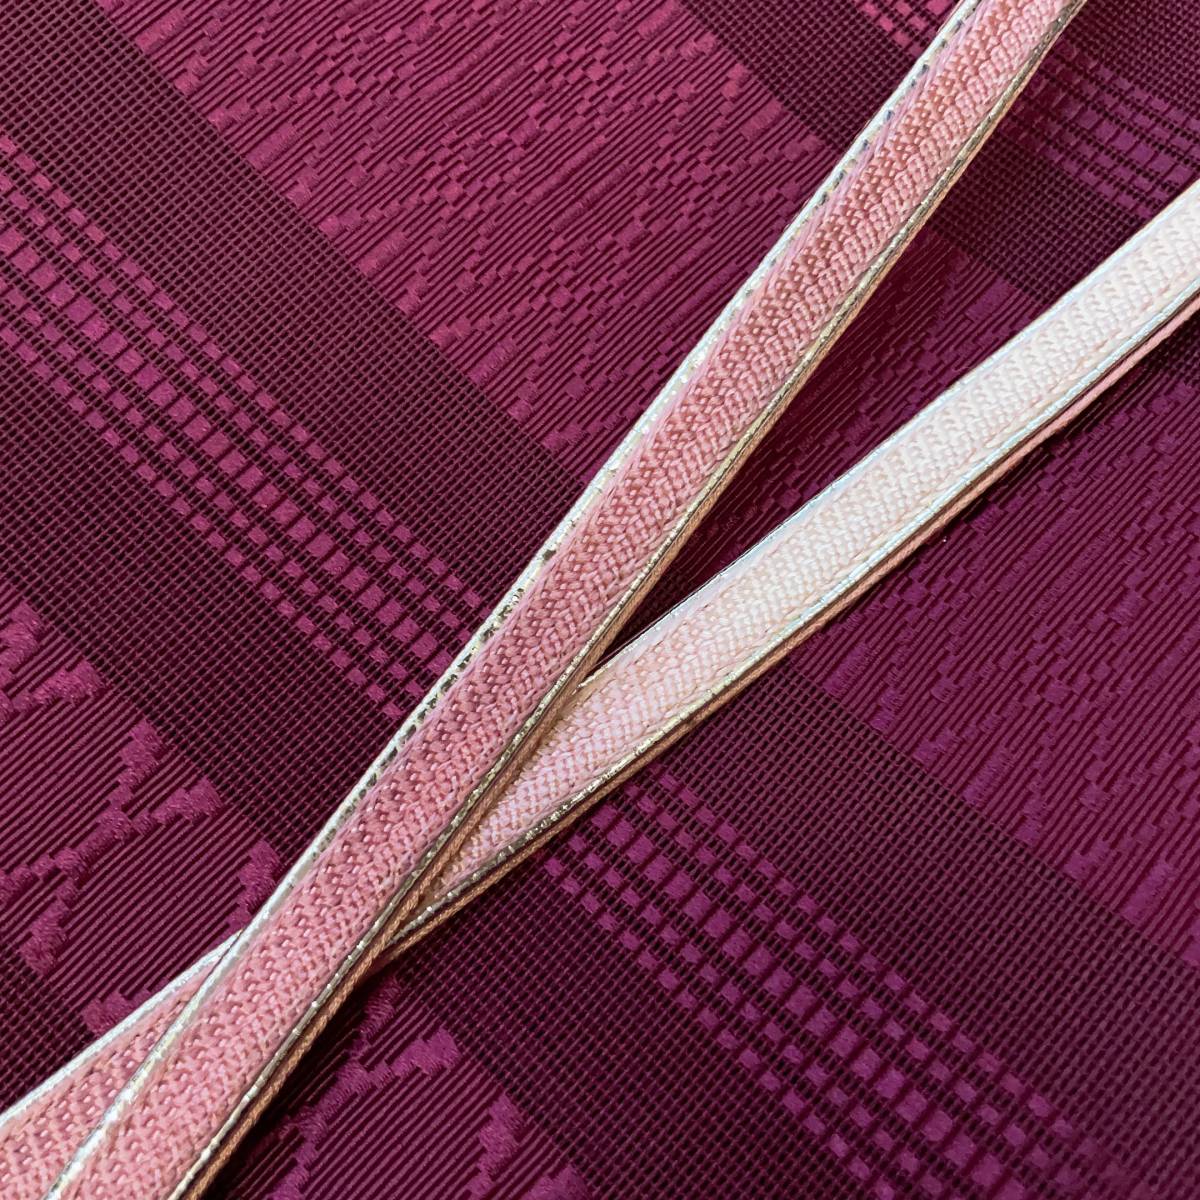 [ woven .R] summer obi set length 367cm width 31cm. on pattern . Japanese clothes peace pattern kimono remake day Mai kimono obi dressing dark red KIMONO JAPAN * including in a package possible * z807